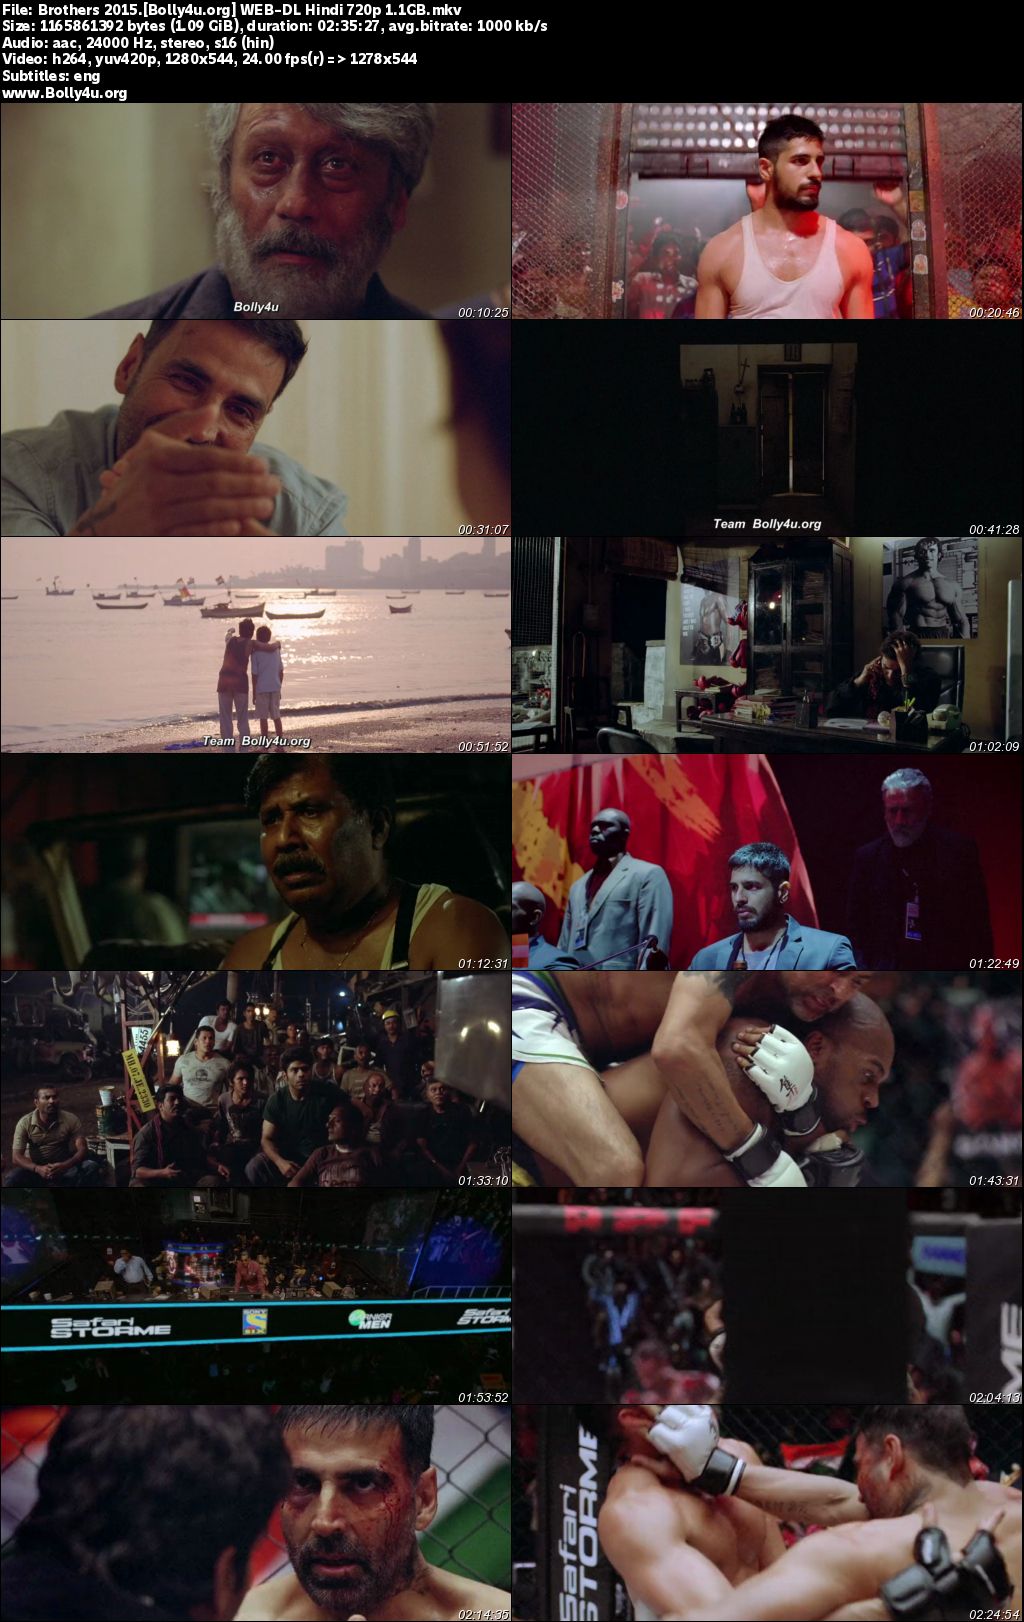 Brothers 2015 WEB-DL Hindi Full Movie Download 1080p 720p 480p